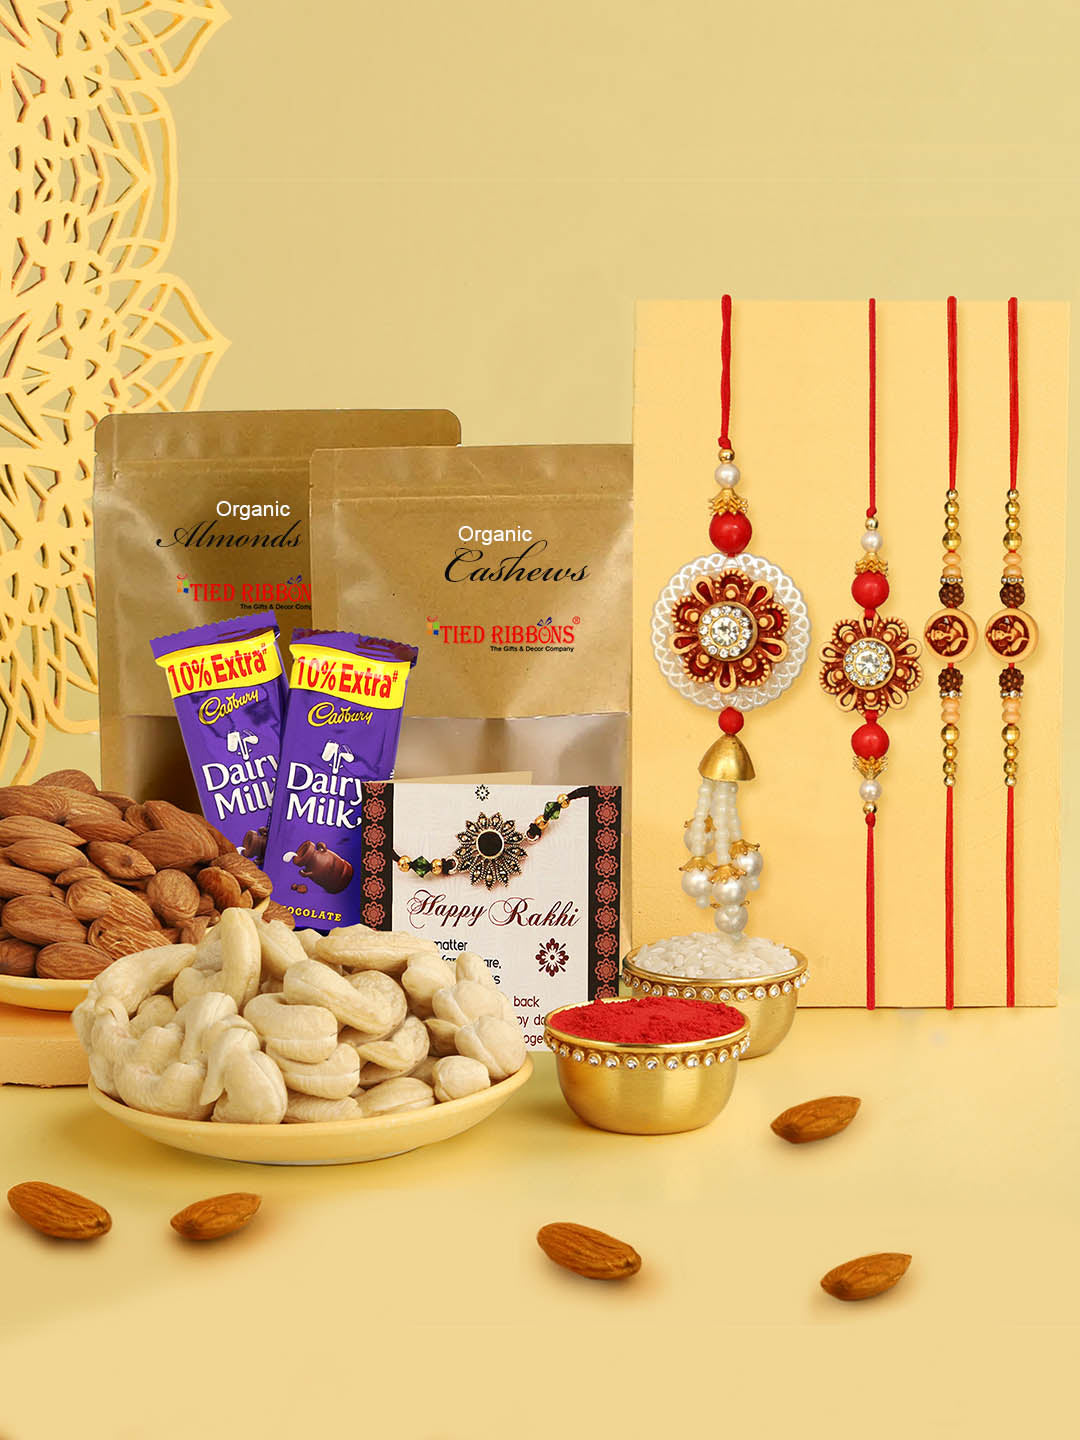 Diwali Hamper with Dry Fruits and Canister: Gift/Send Business Gifts Online  JVS1188147 |IGP.com